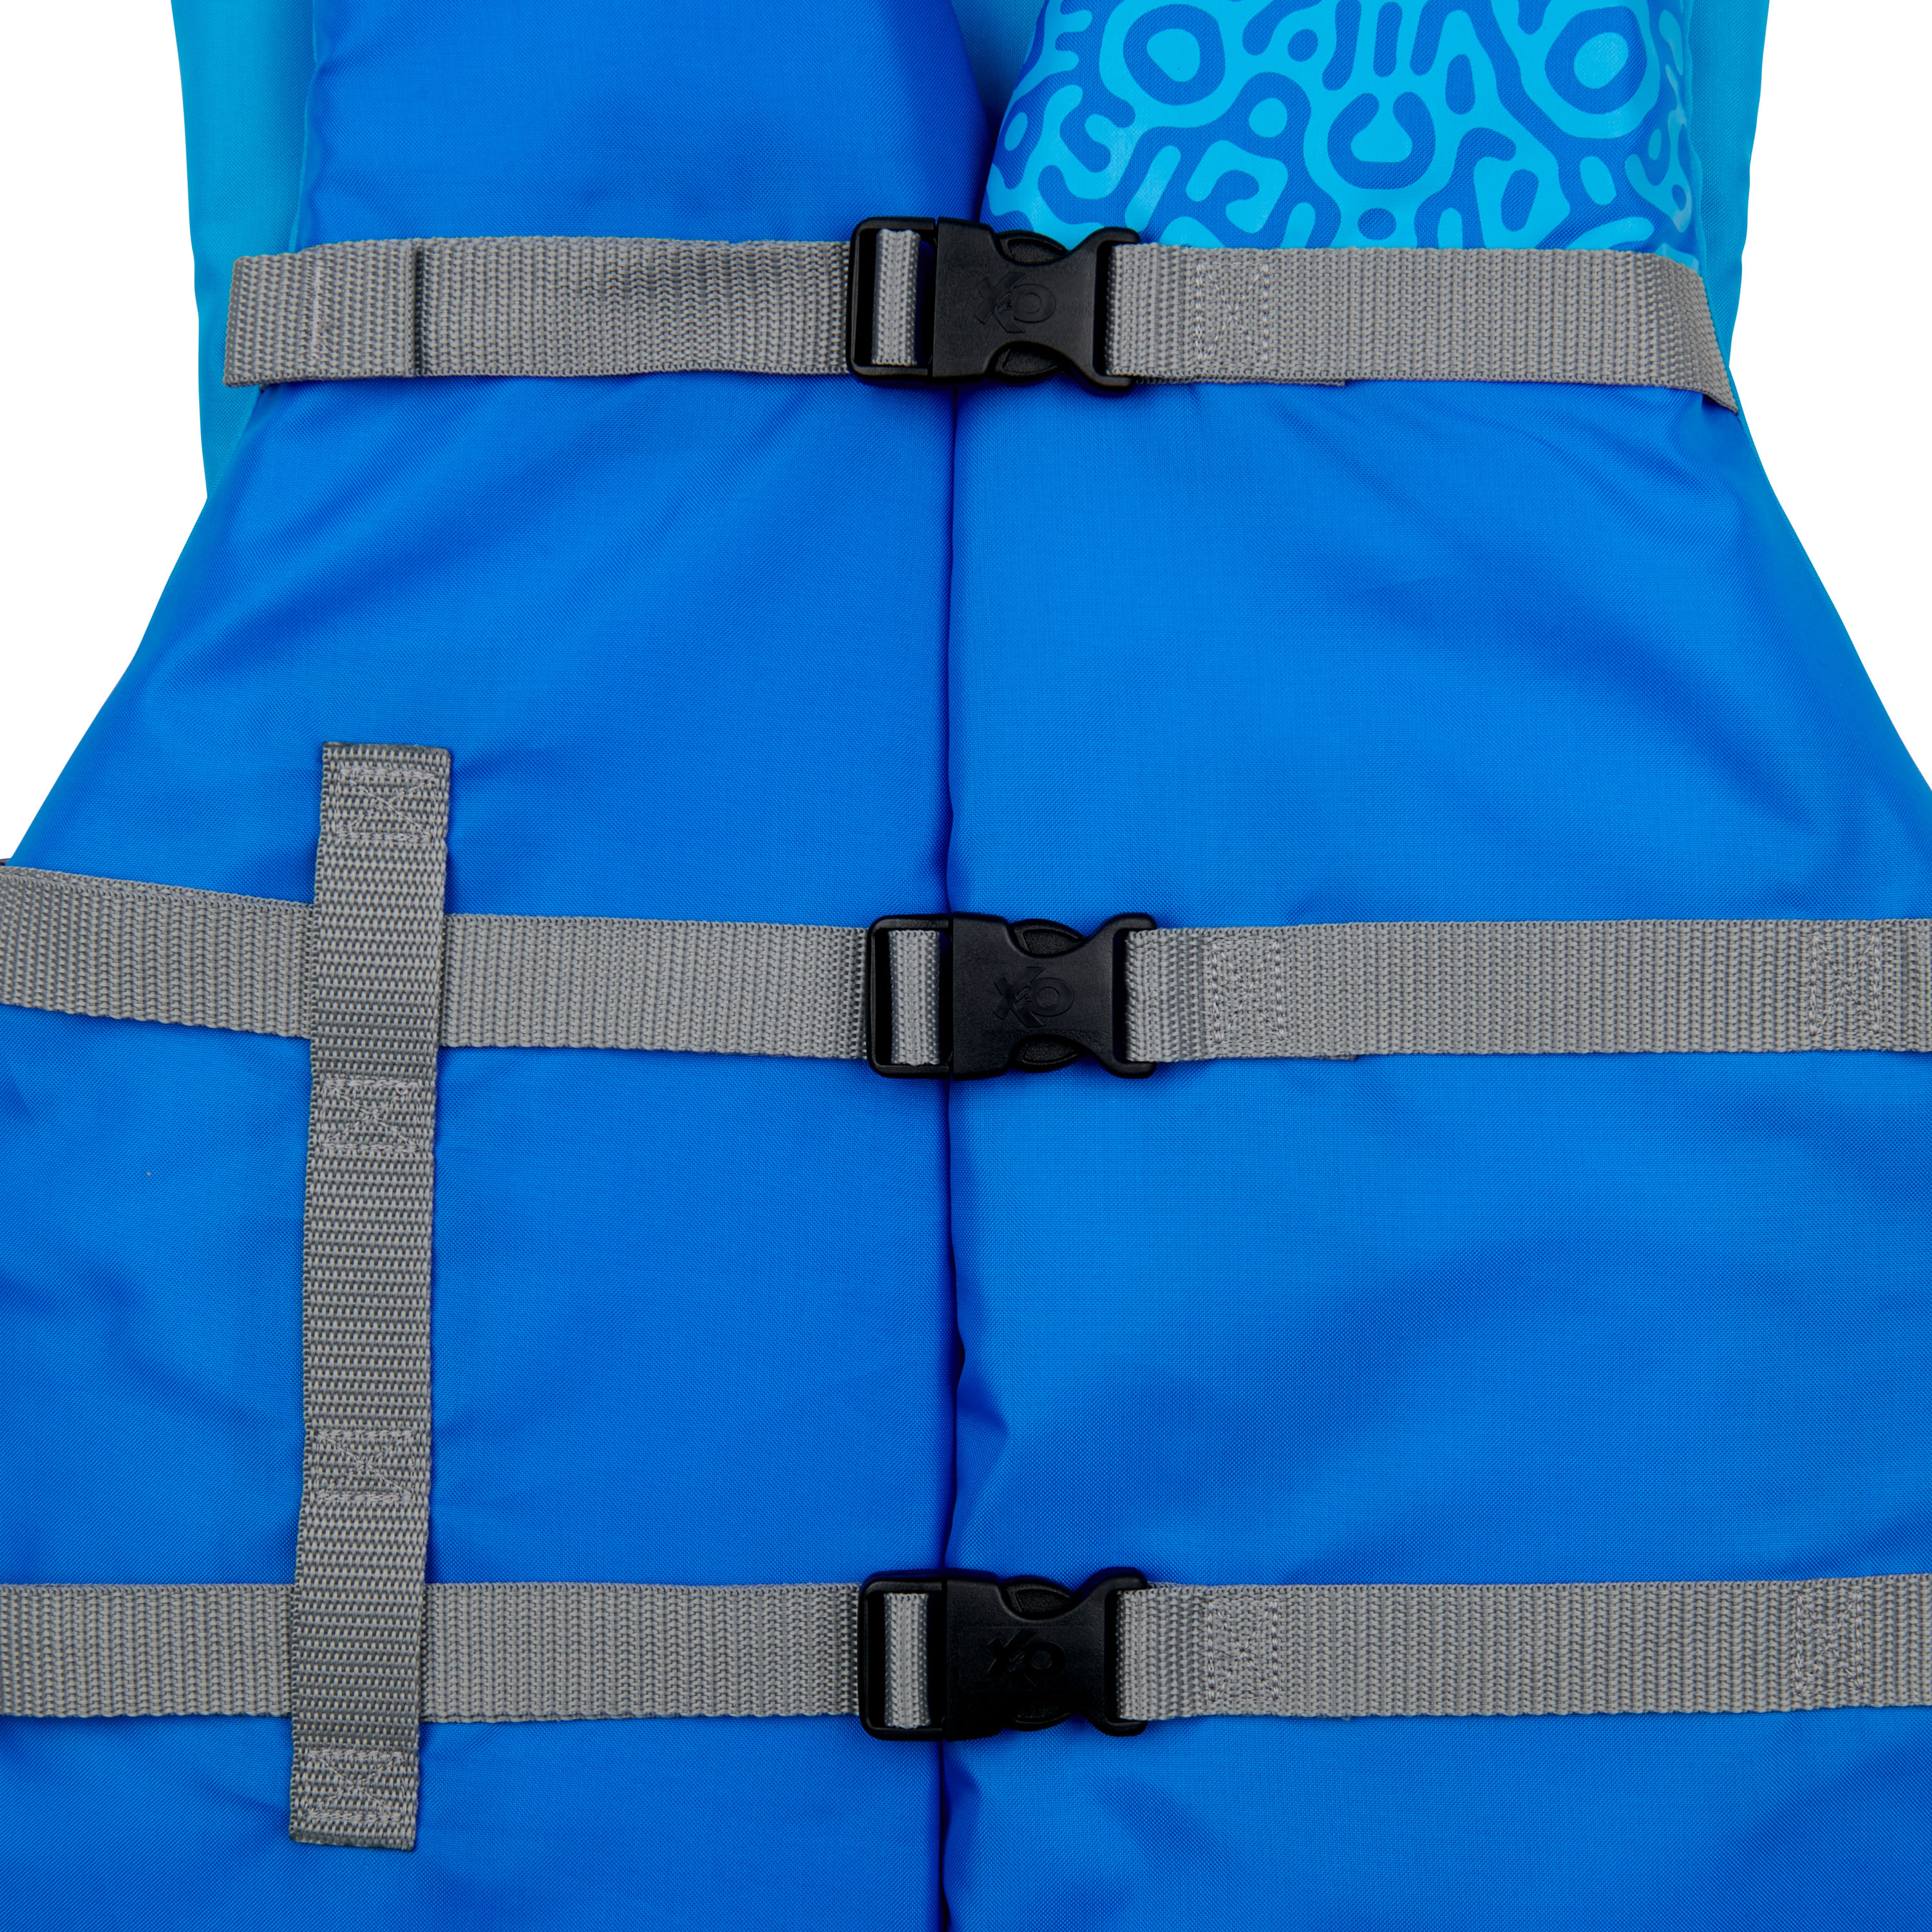 X2O Universal Adult 2X/3X Life Vest and Jacket, (50" - 60" Chest), Blue Ocean Coral - image 4 of 11